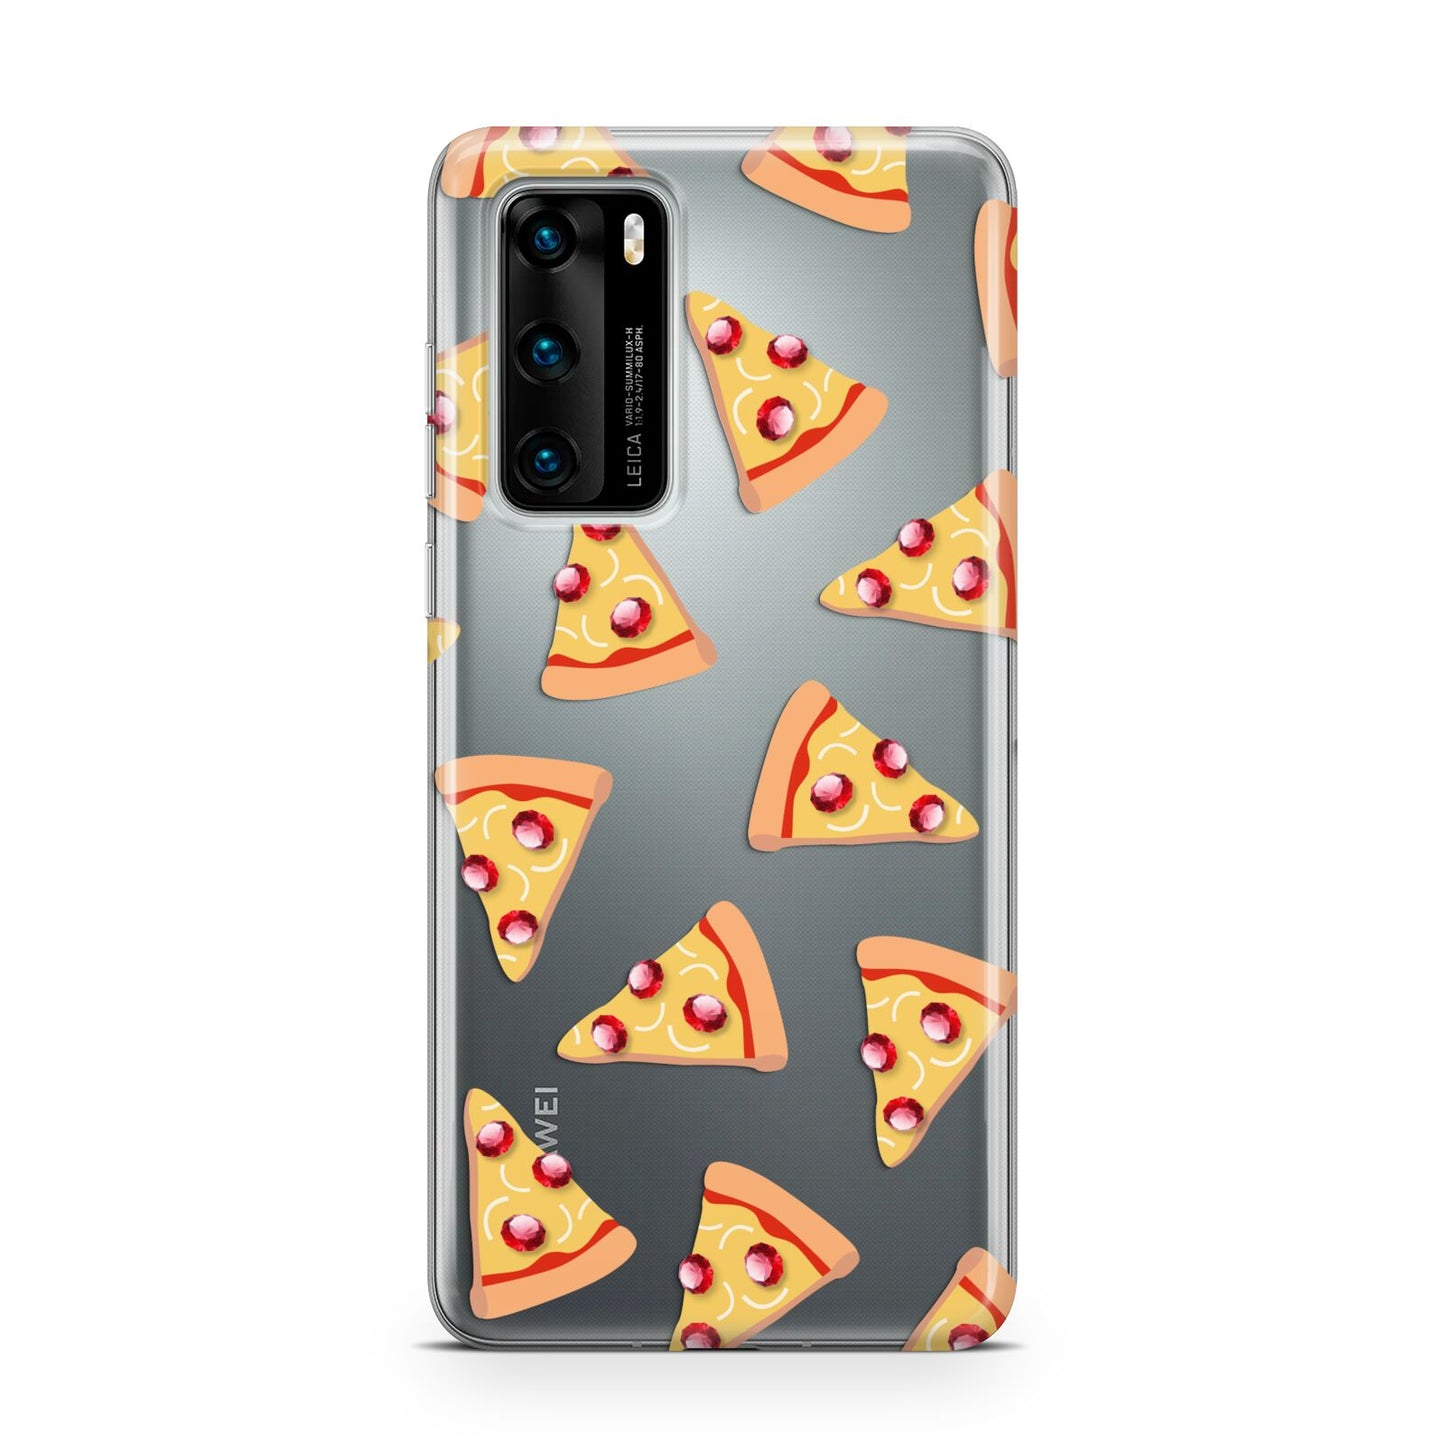 Rubies on Cartoon Pizza Slices Huawei P40 Phone Case